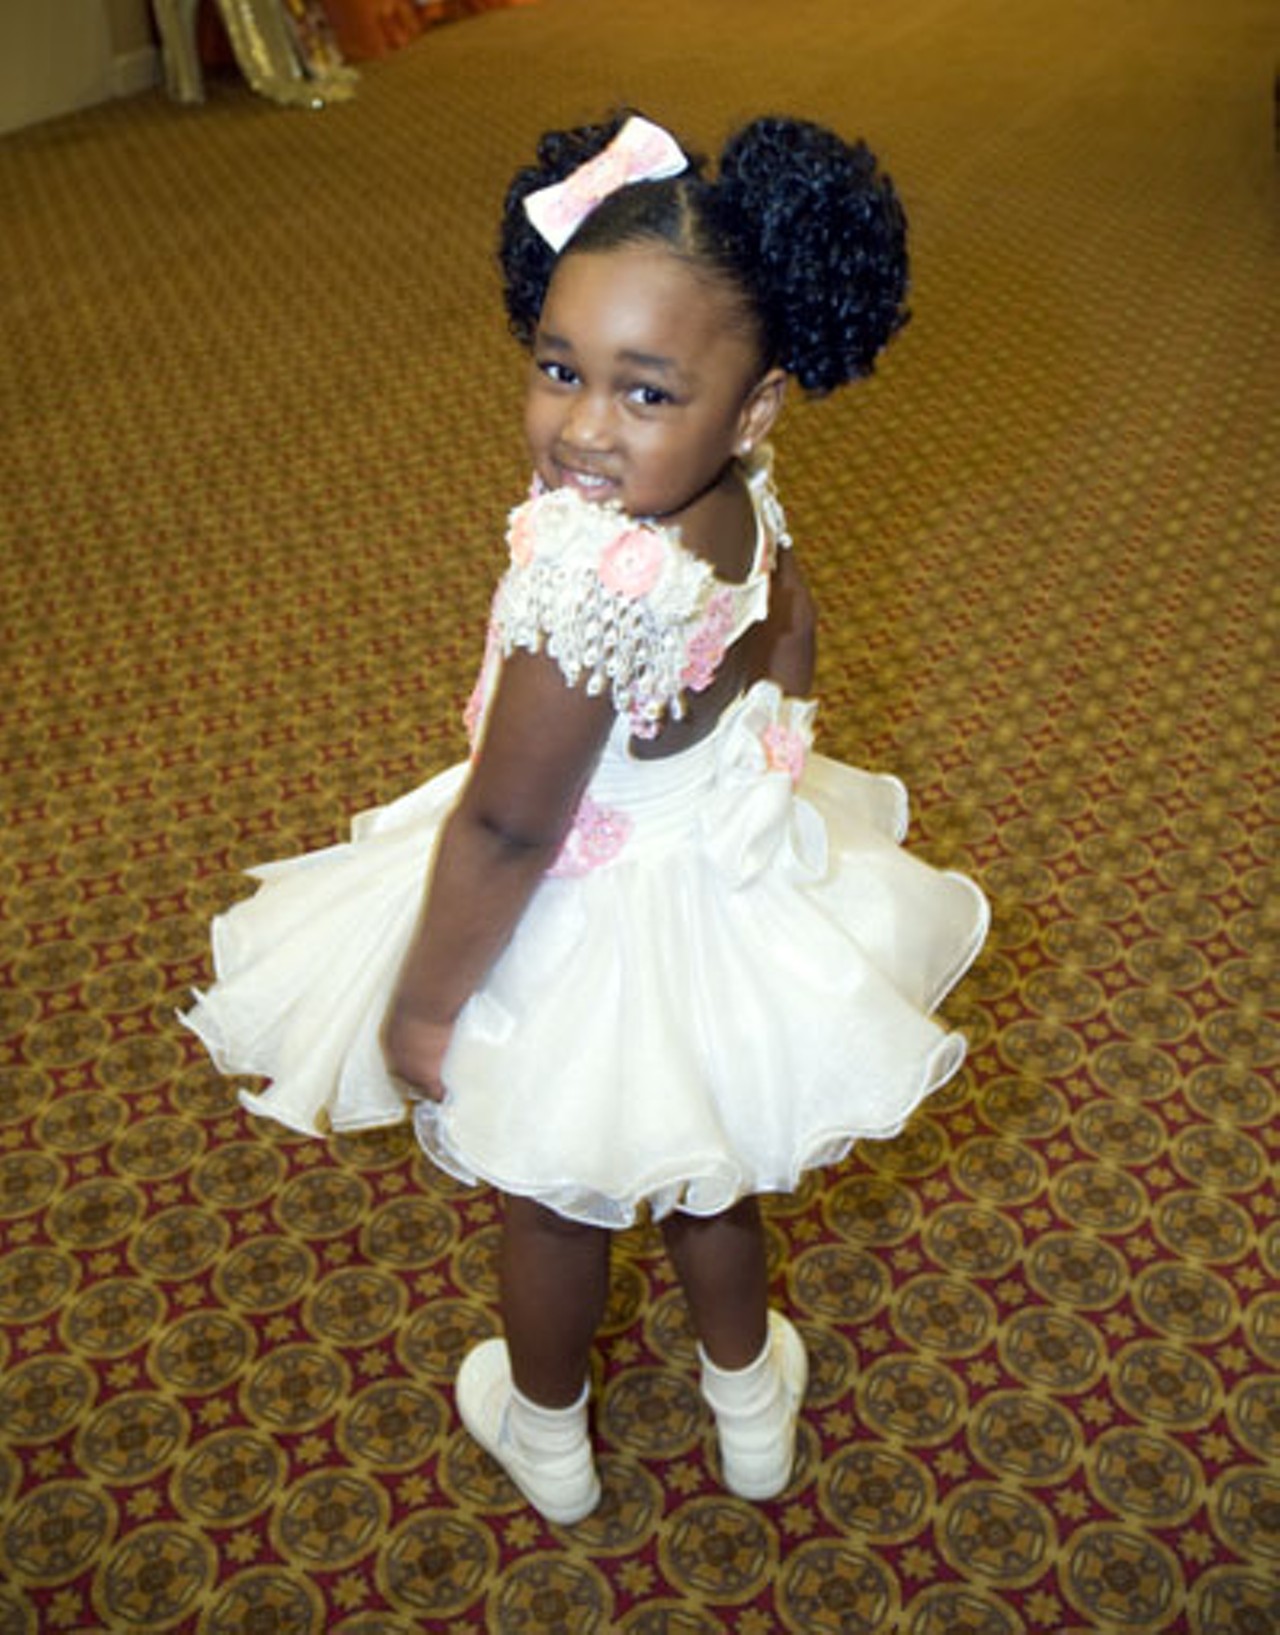 Gabrielle Alexis Mathis, four years old, competed against Victoria, Gracie and Davana for the title Little Miss Dream Girls USA.